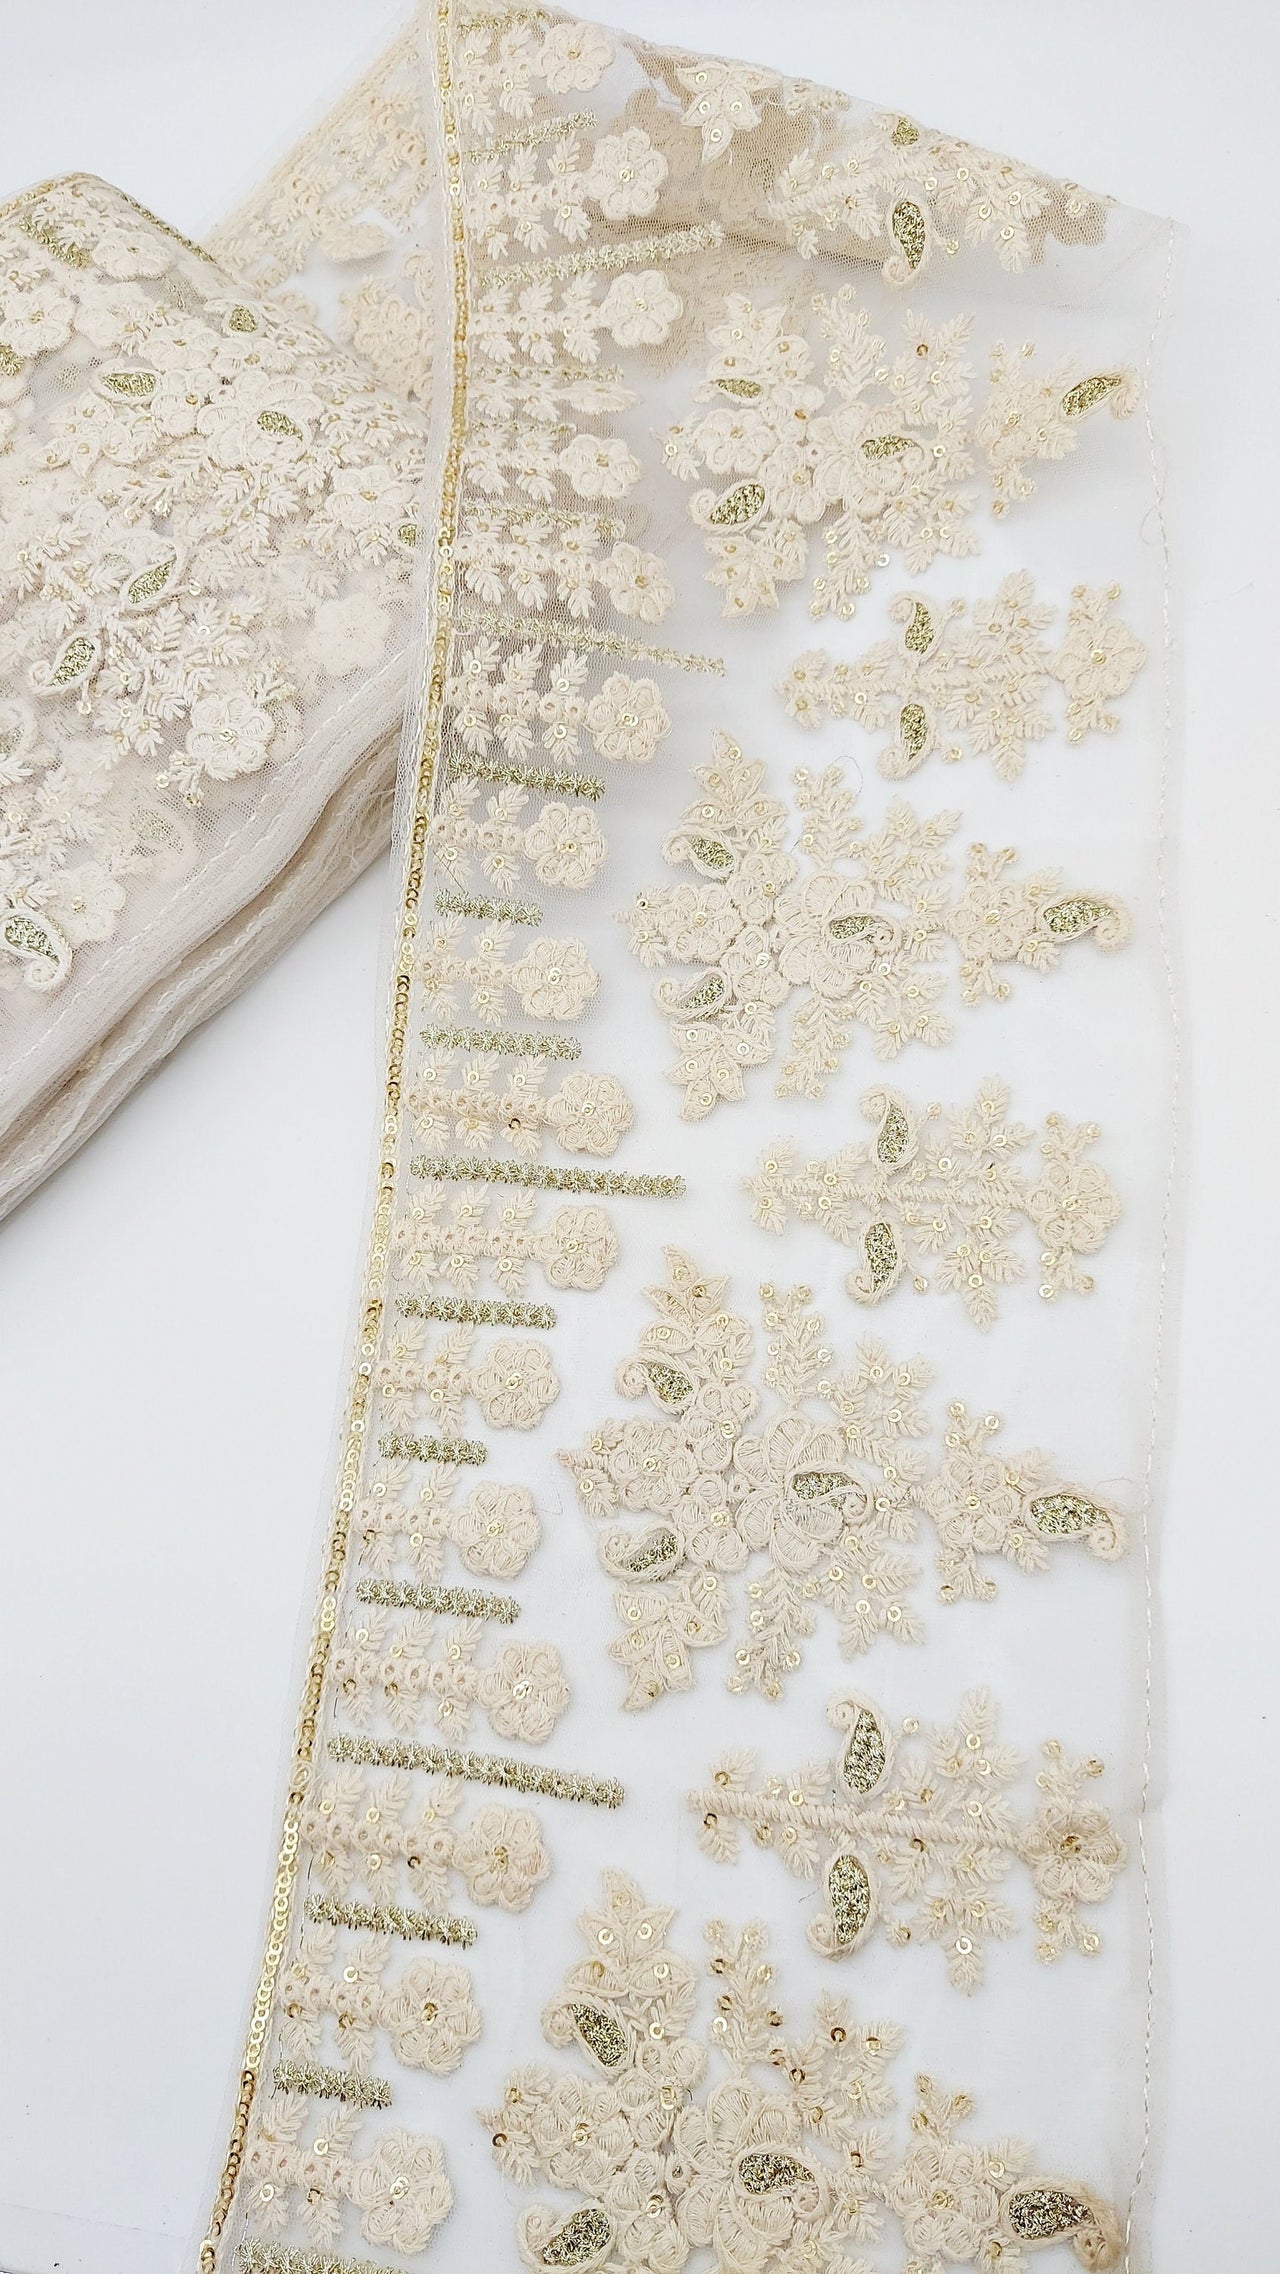 9 Yards Off White Net Lace Trim Floral Embroidery and Gold Sequins, Floral Sari Border, Decorative Trim